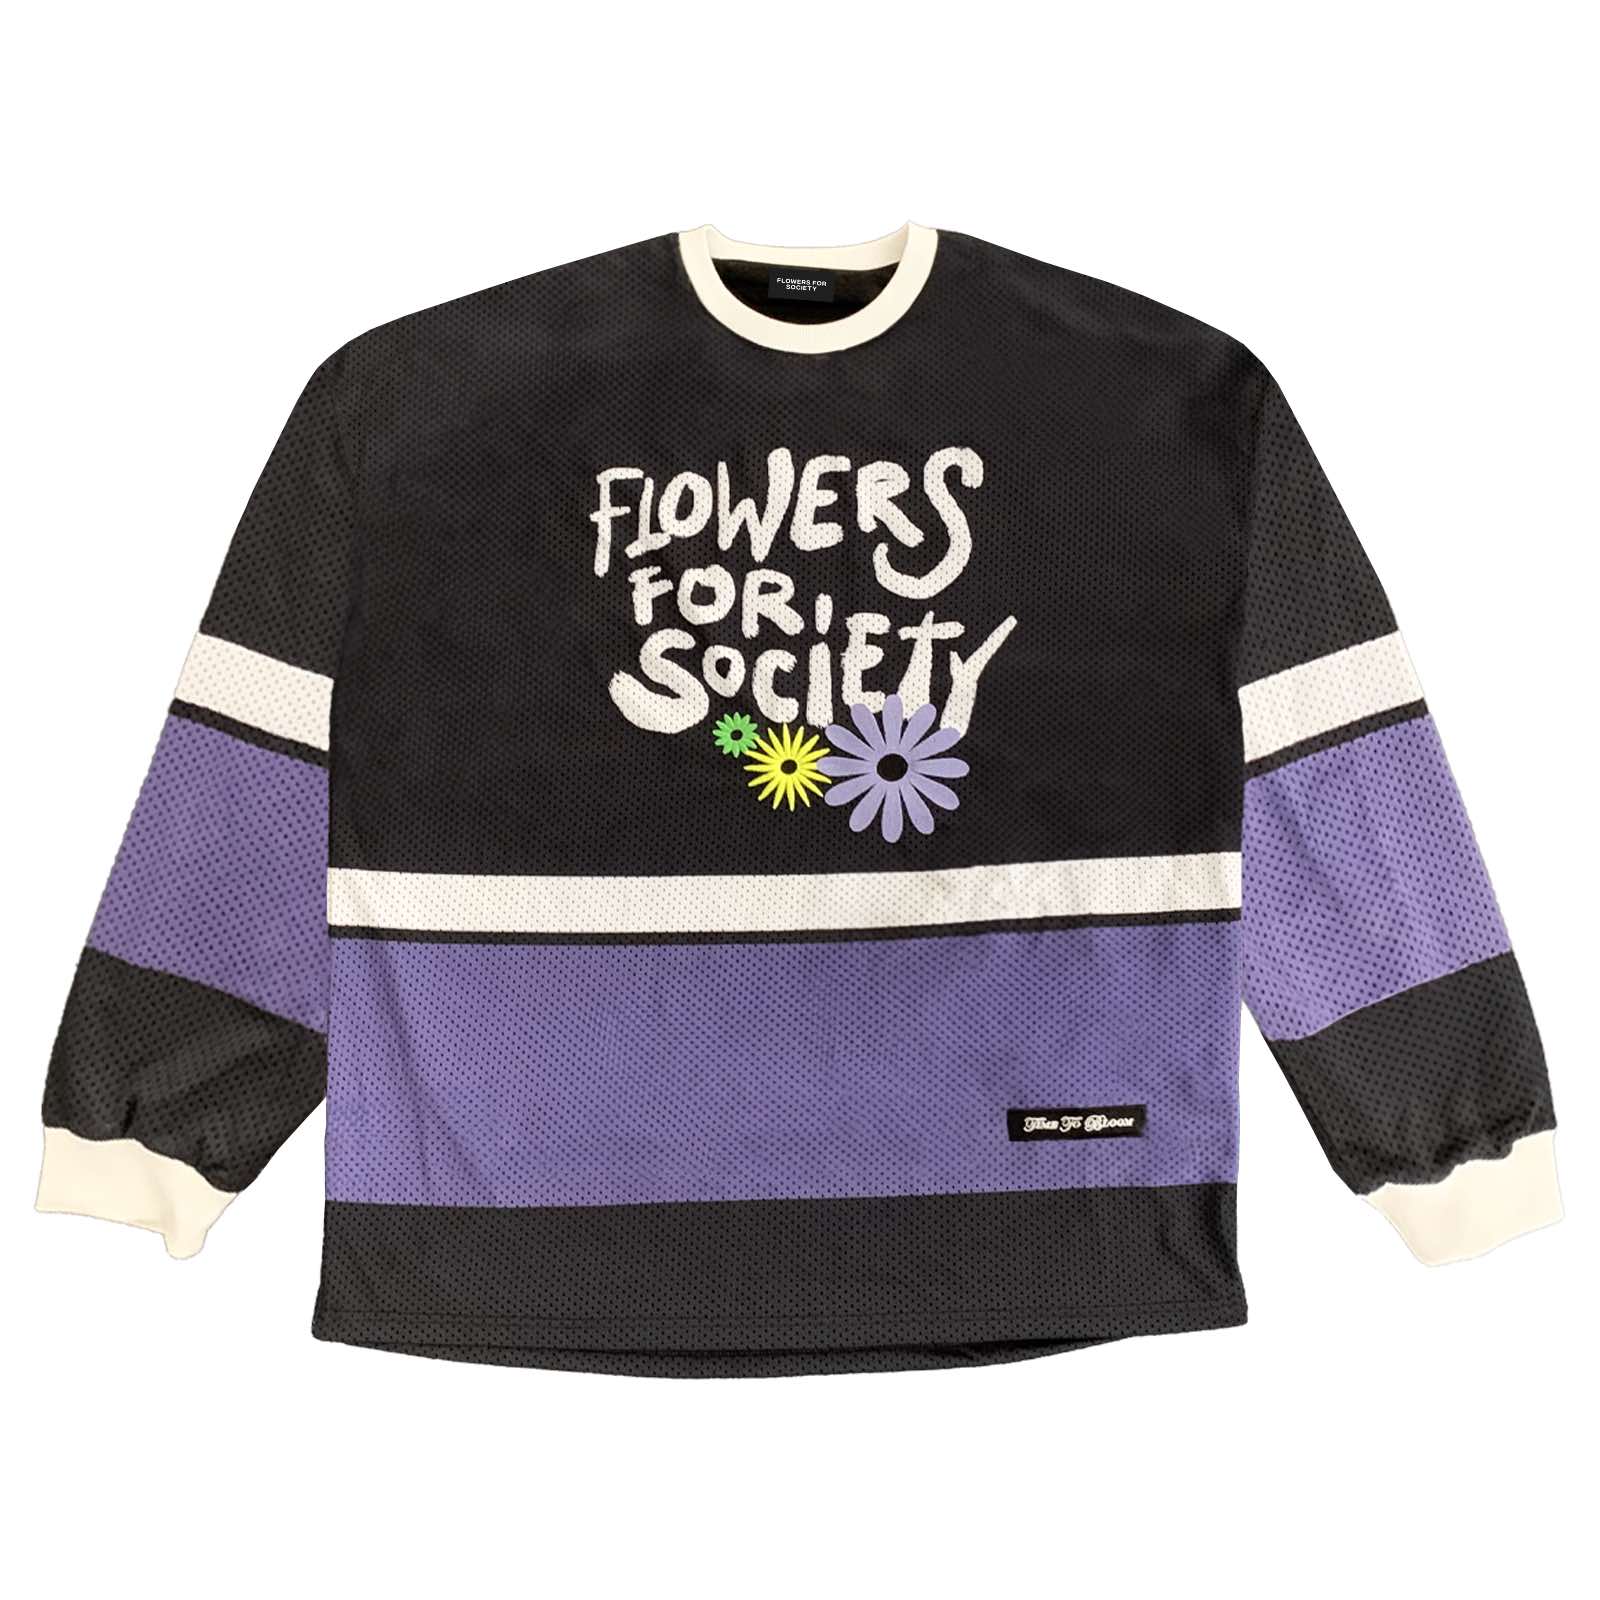 Flowers for Society flowers mesh jersey black purple front view